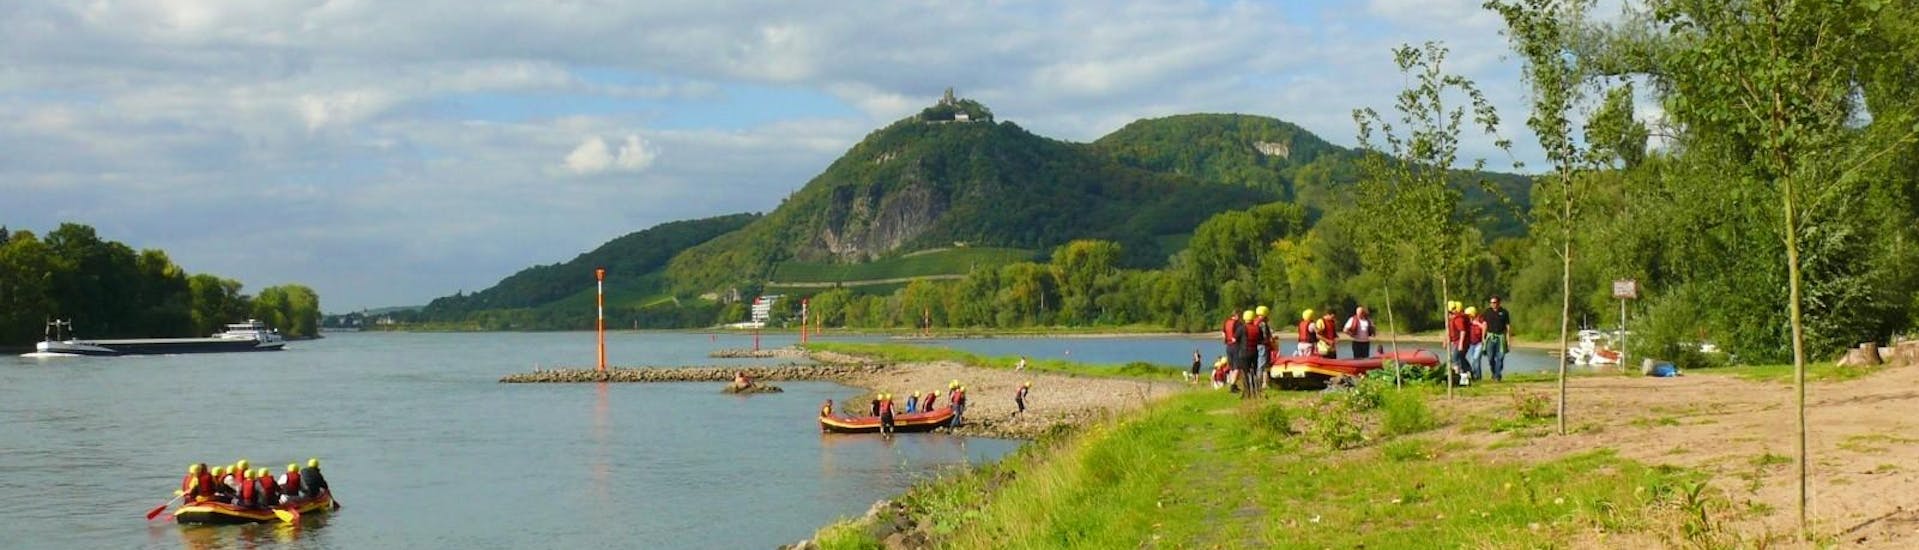 The raft is going on the water during the Soft Rafting on the Rhine in Bonn at Drachenfels with Wupperkanu Rhein.